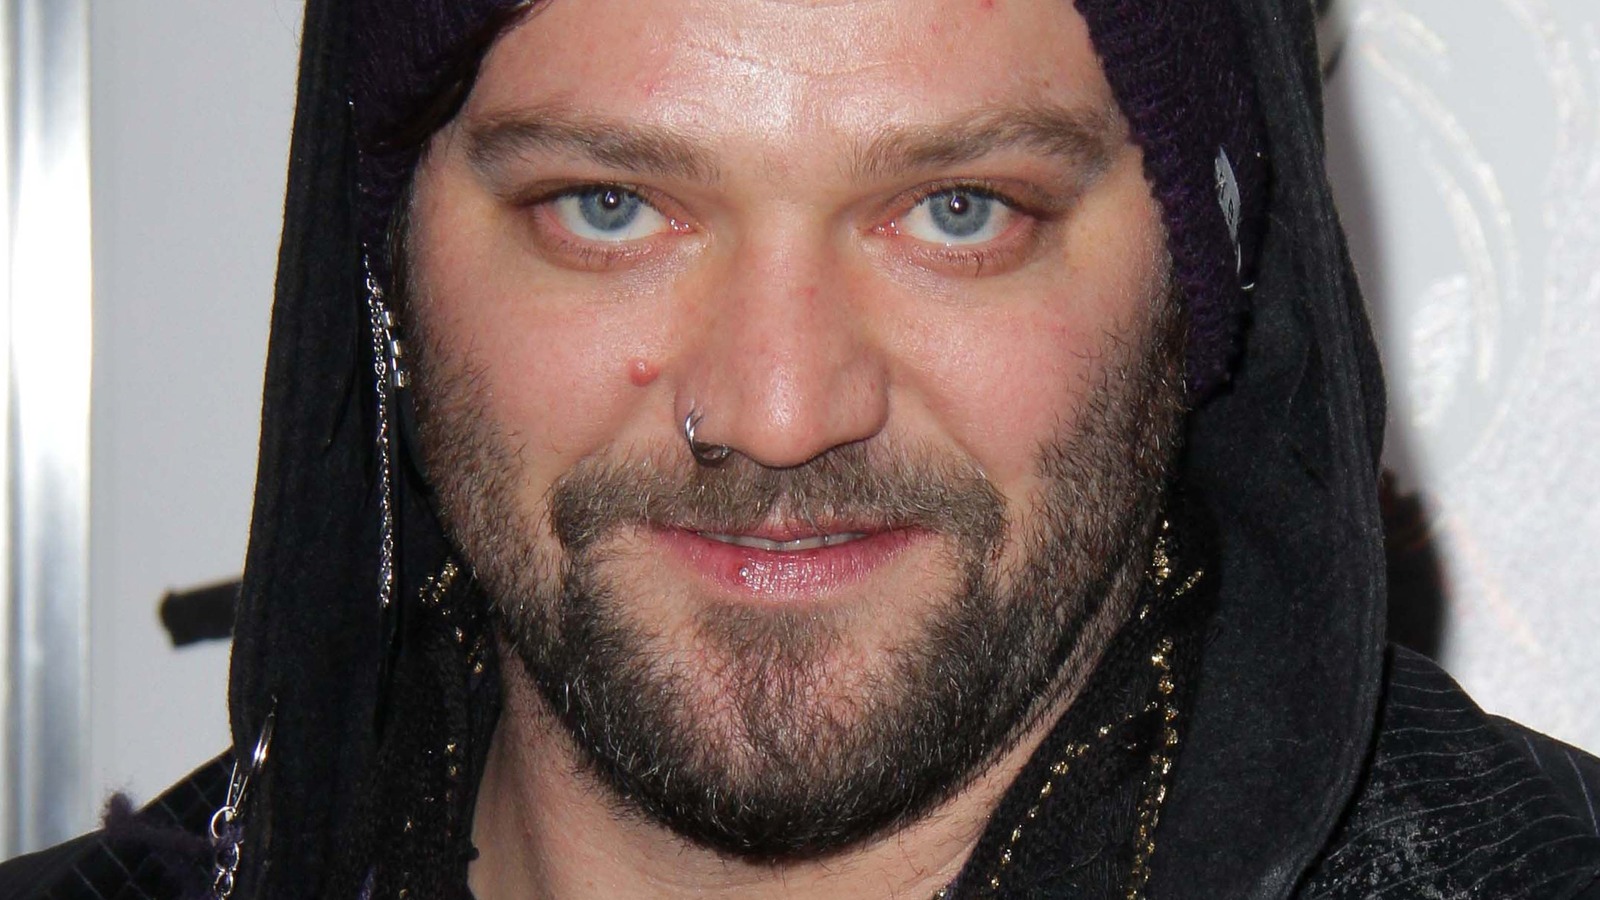 Details About Bam Margera S Disturbing 911 Call Controversy Explained